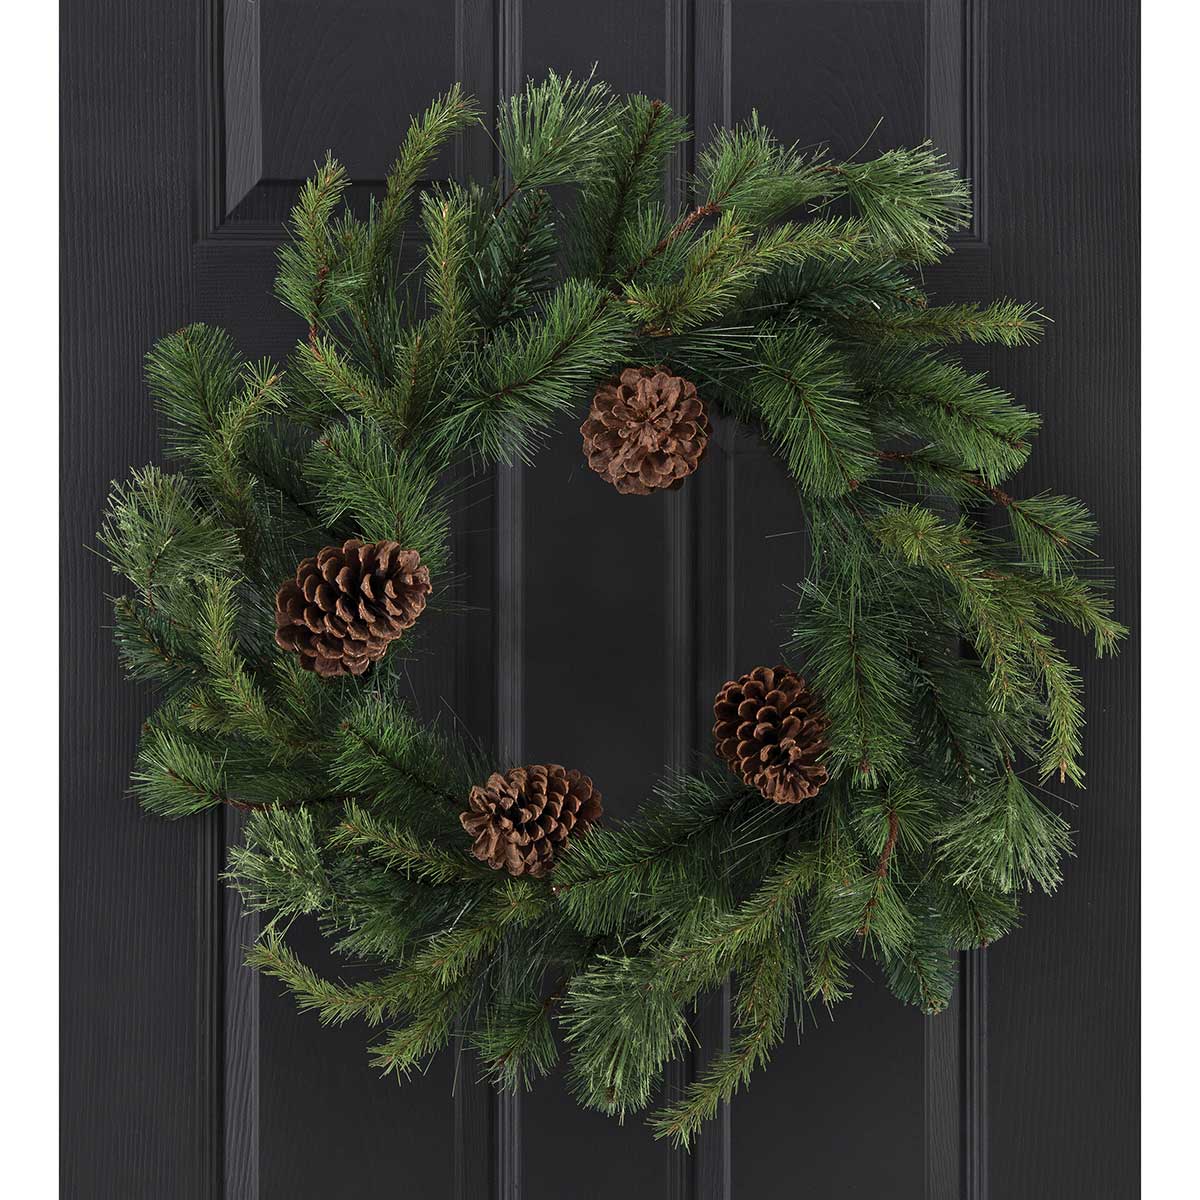 WREATH AUSTRIAN PINE MIX 28IN (INNER RING 13IN) - Click Image to Close